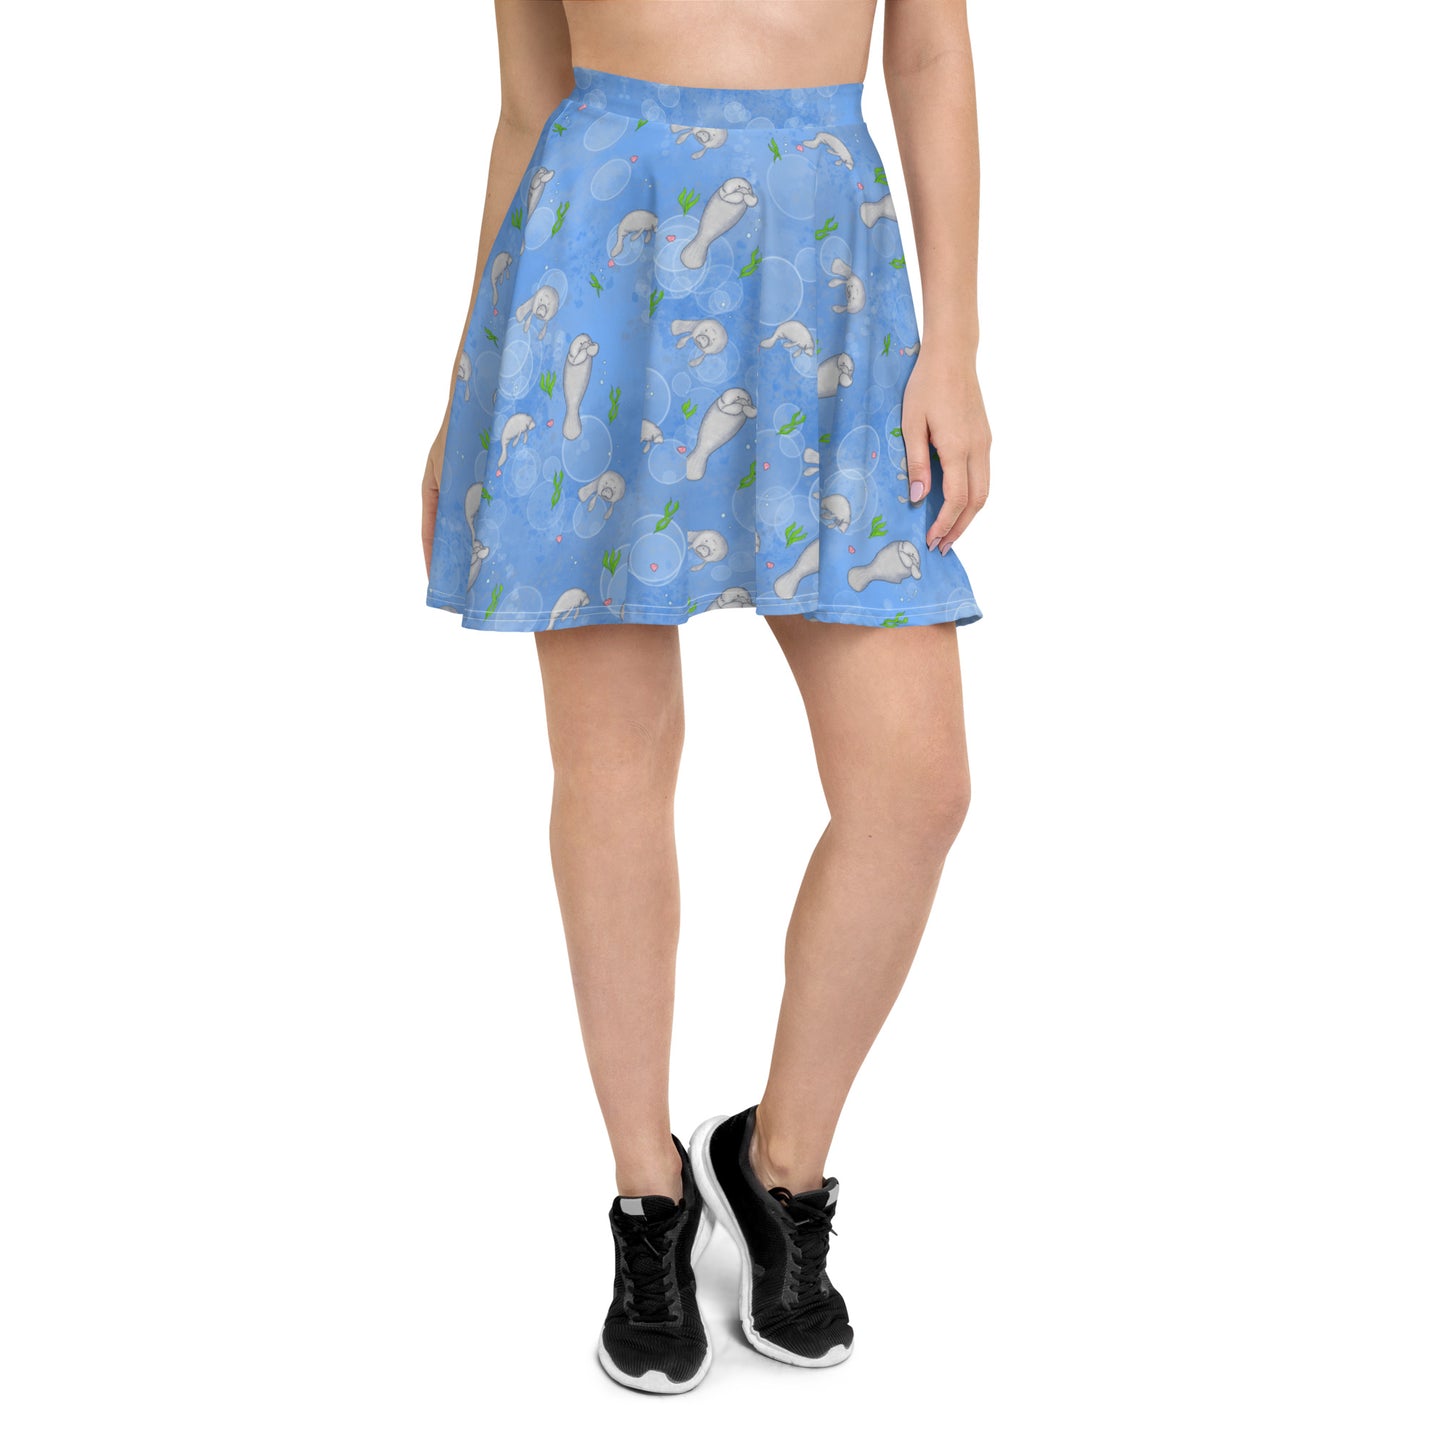 Manatee patterned skater skirt with elastic waist and mid-thigh length skirt. Has a pattern of manatees, seashells, seaweed and bubbles on a blue background. Shown on female model with black shoes.